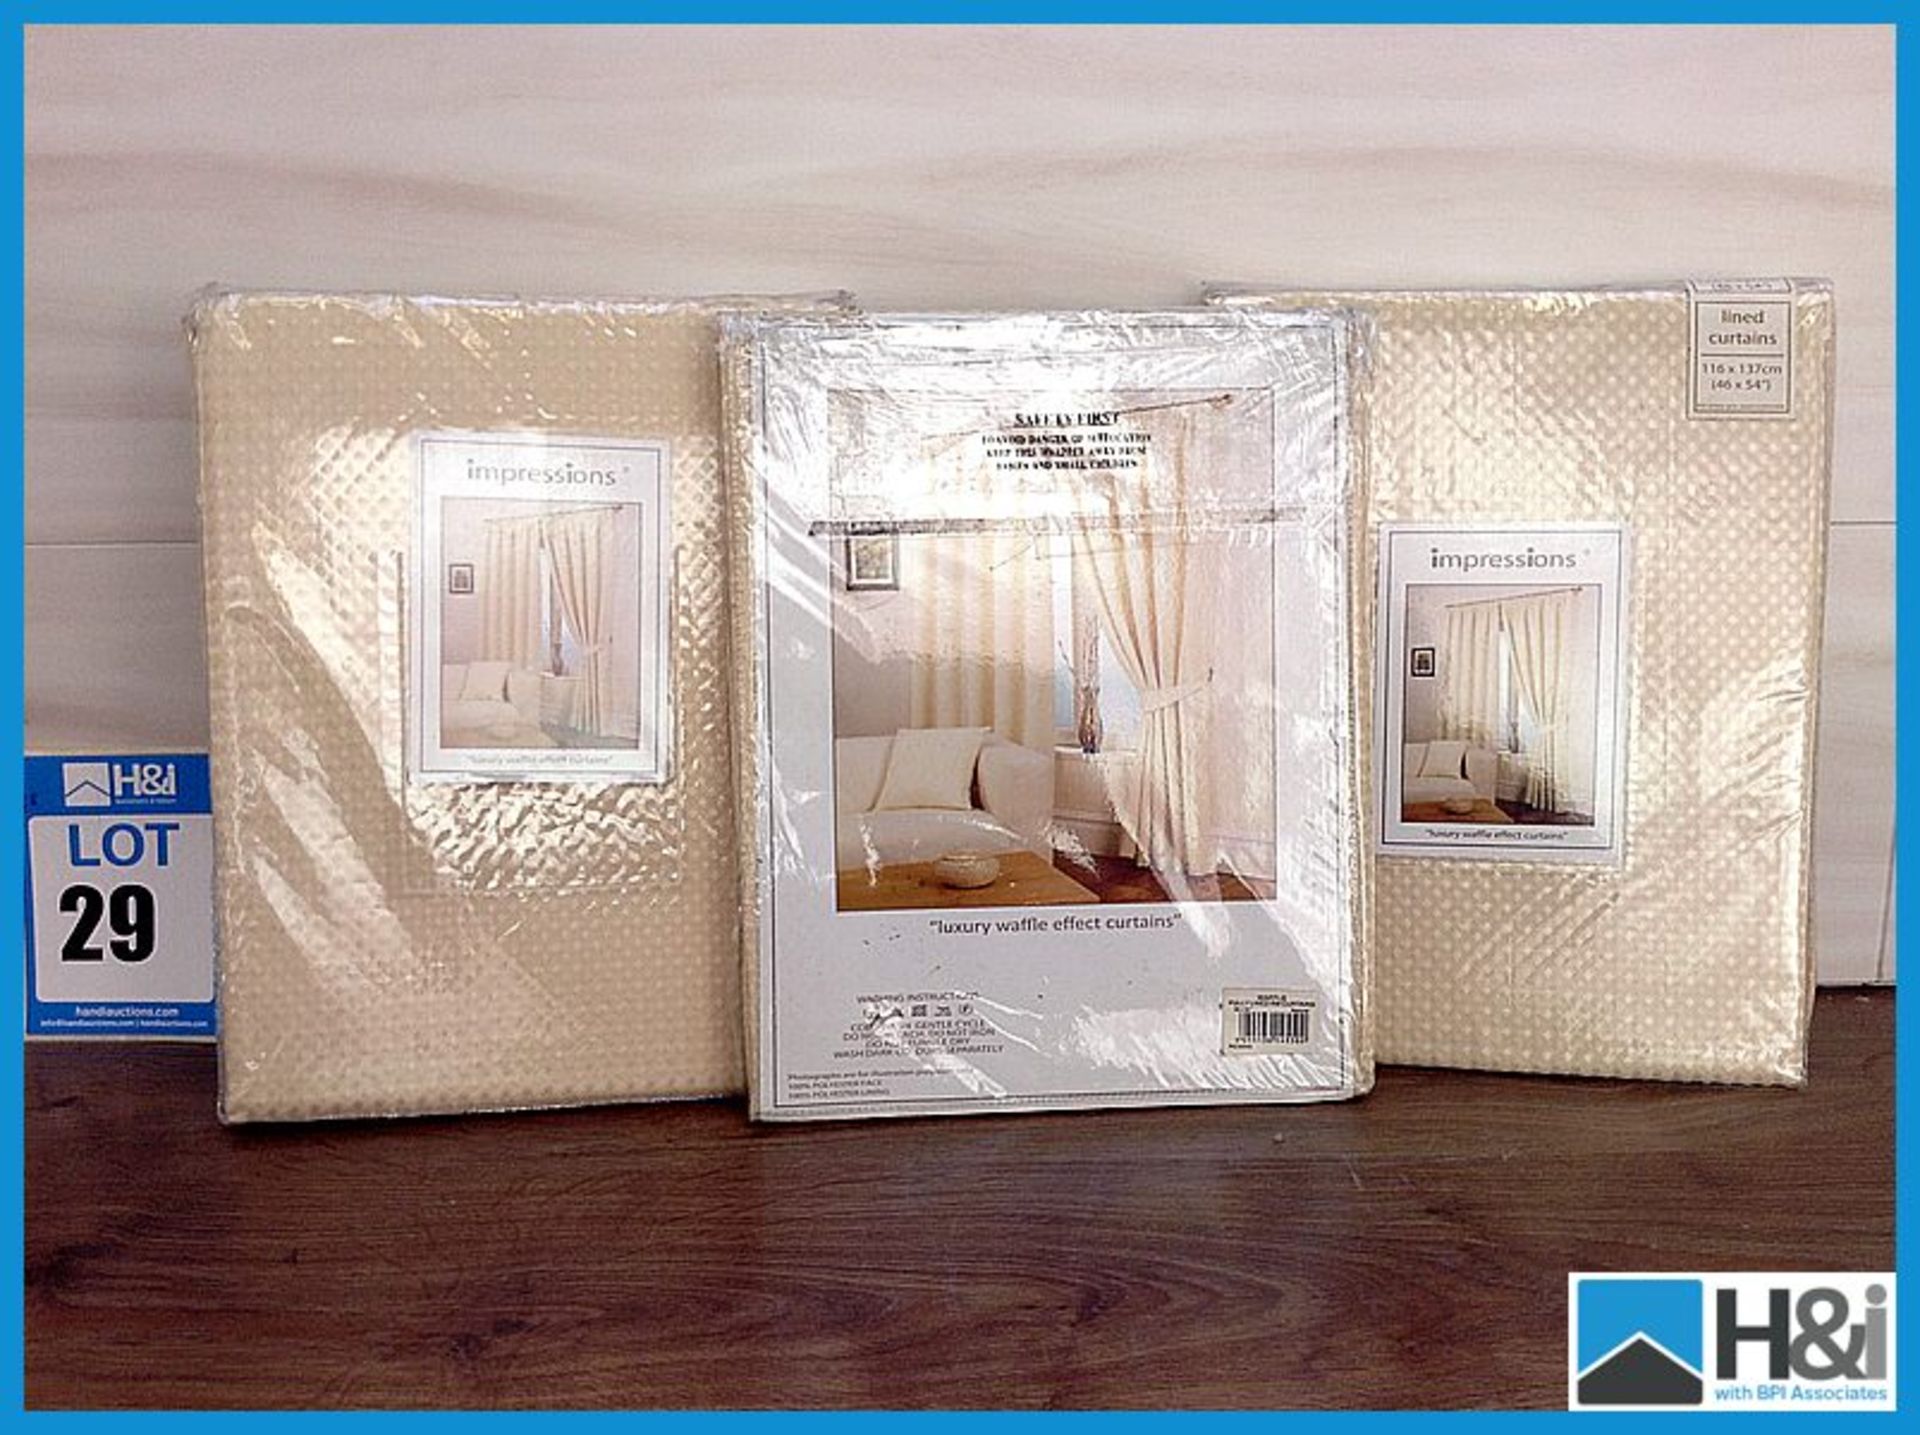 Impressions Waffle effect Curtain in natural 1 pair 66 x 72cm, 2 pairs 46 x 54cm Appraisal: Good